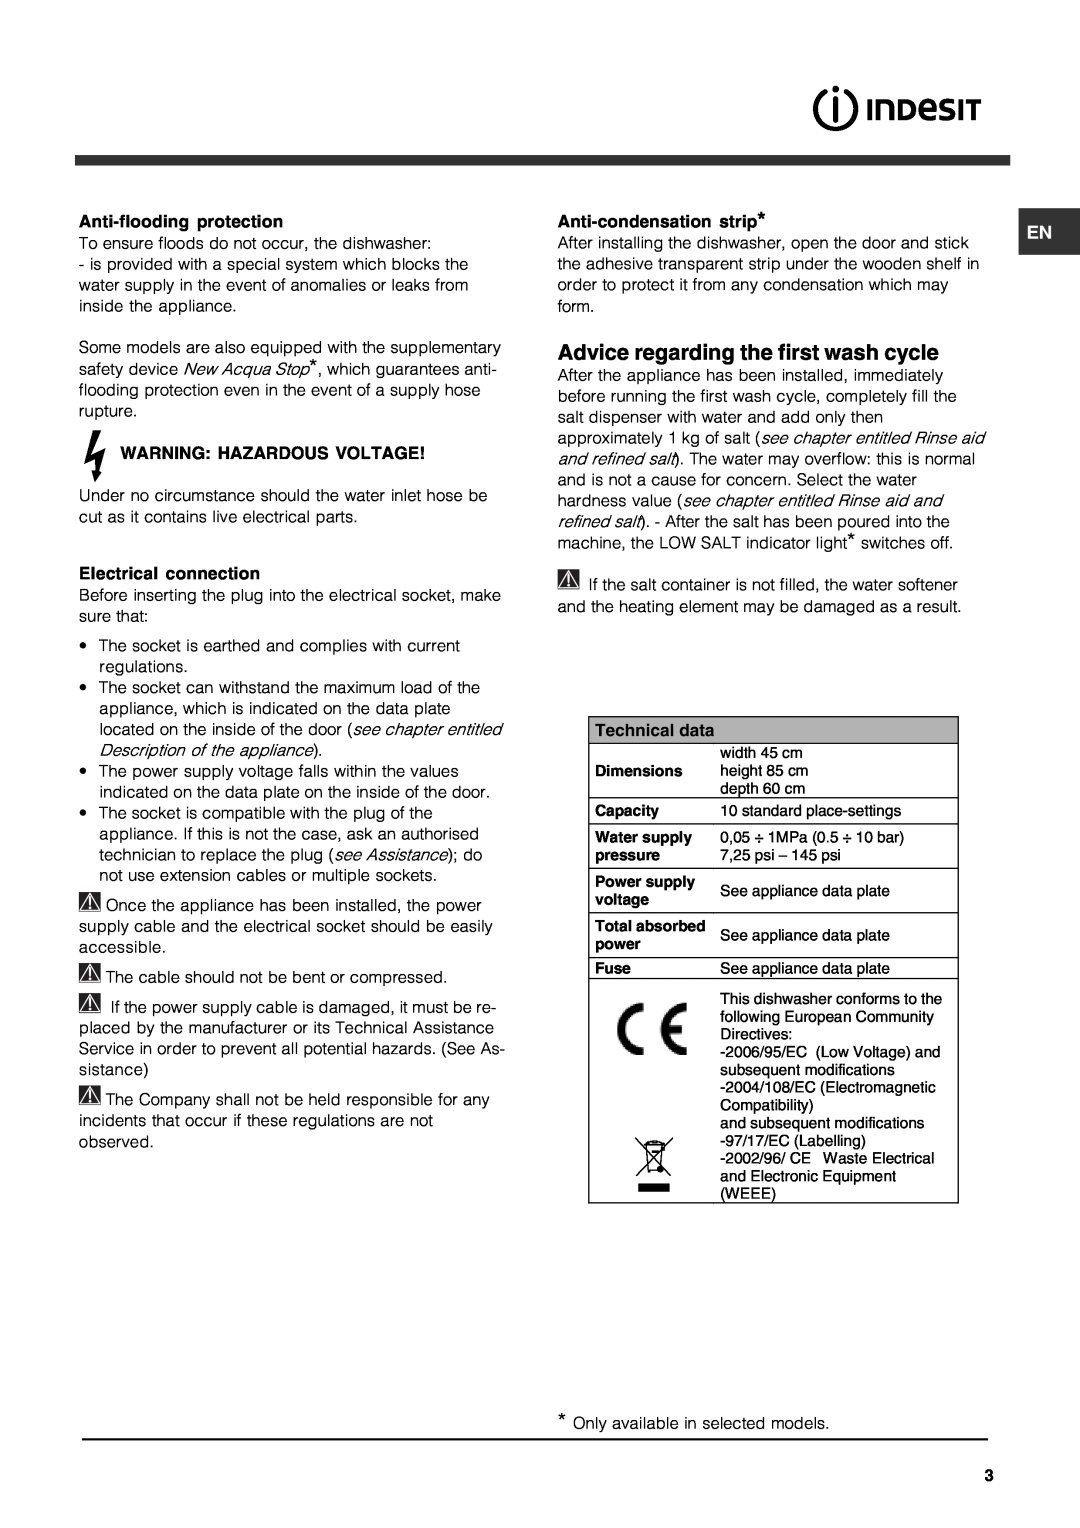 Indesit IDS 105 manual Advice regarding the first wash cycle, Technical data 